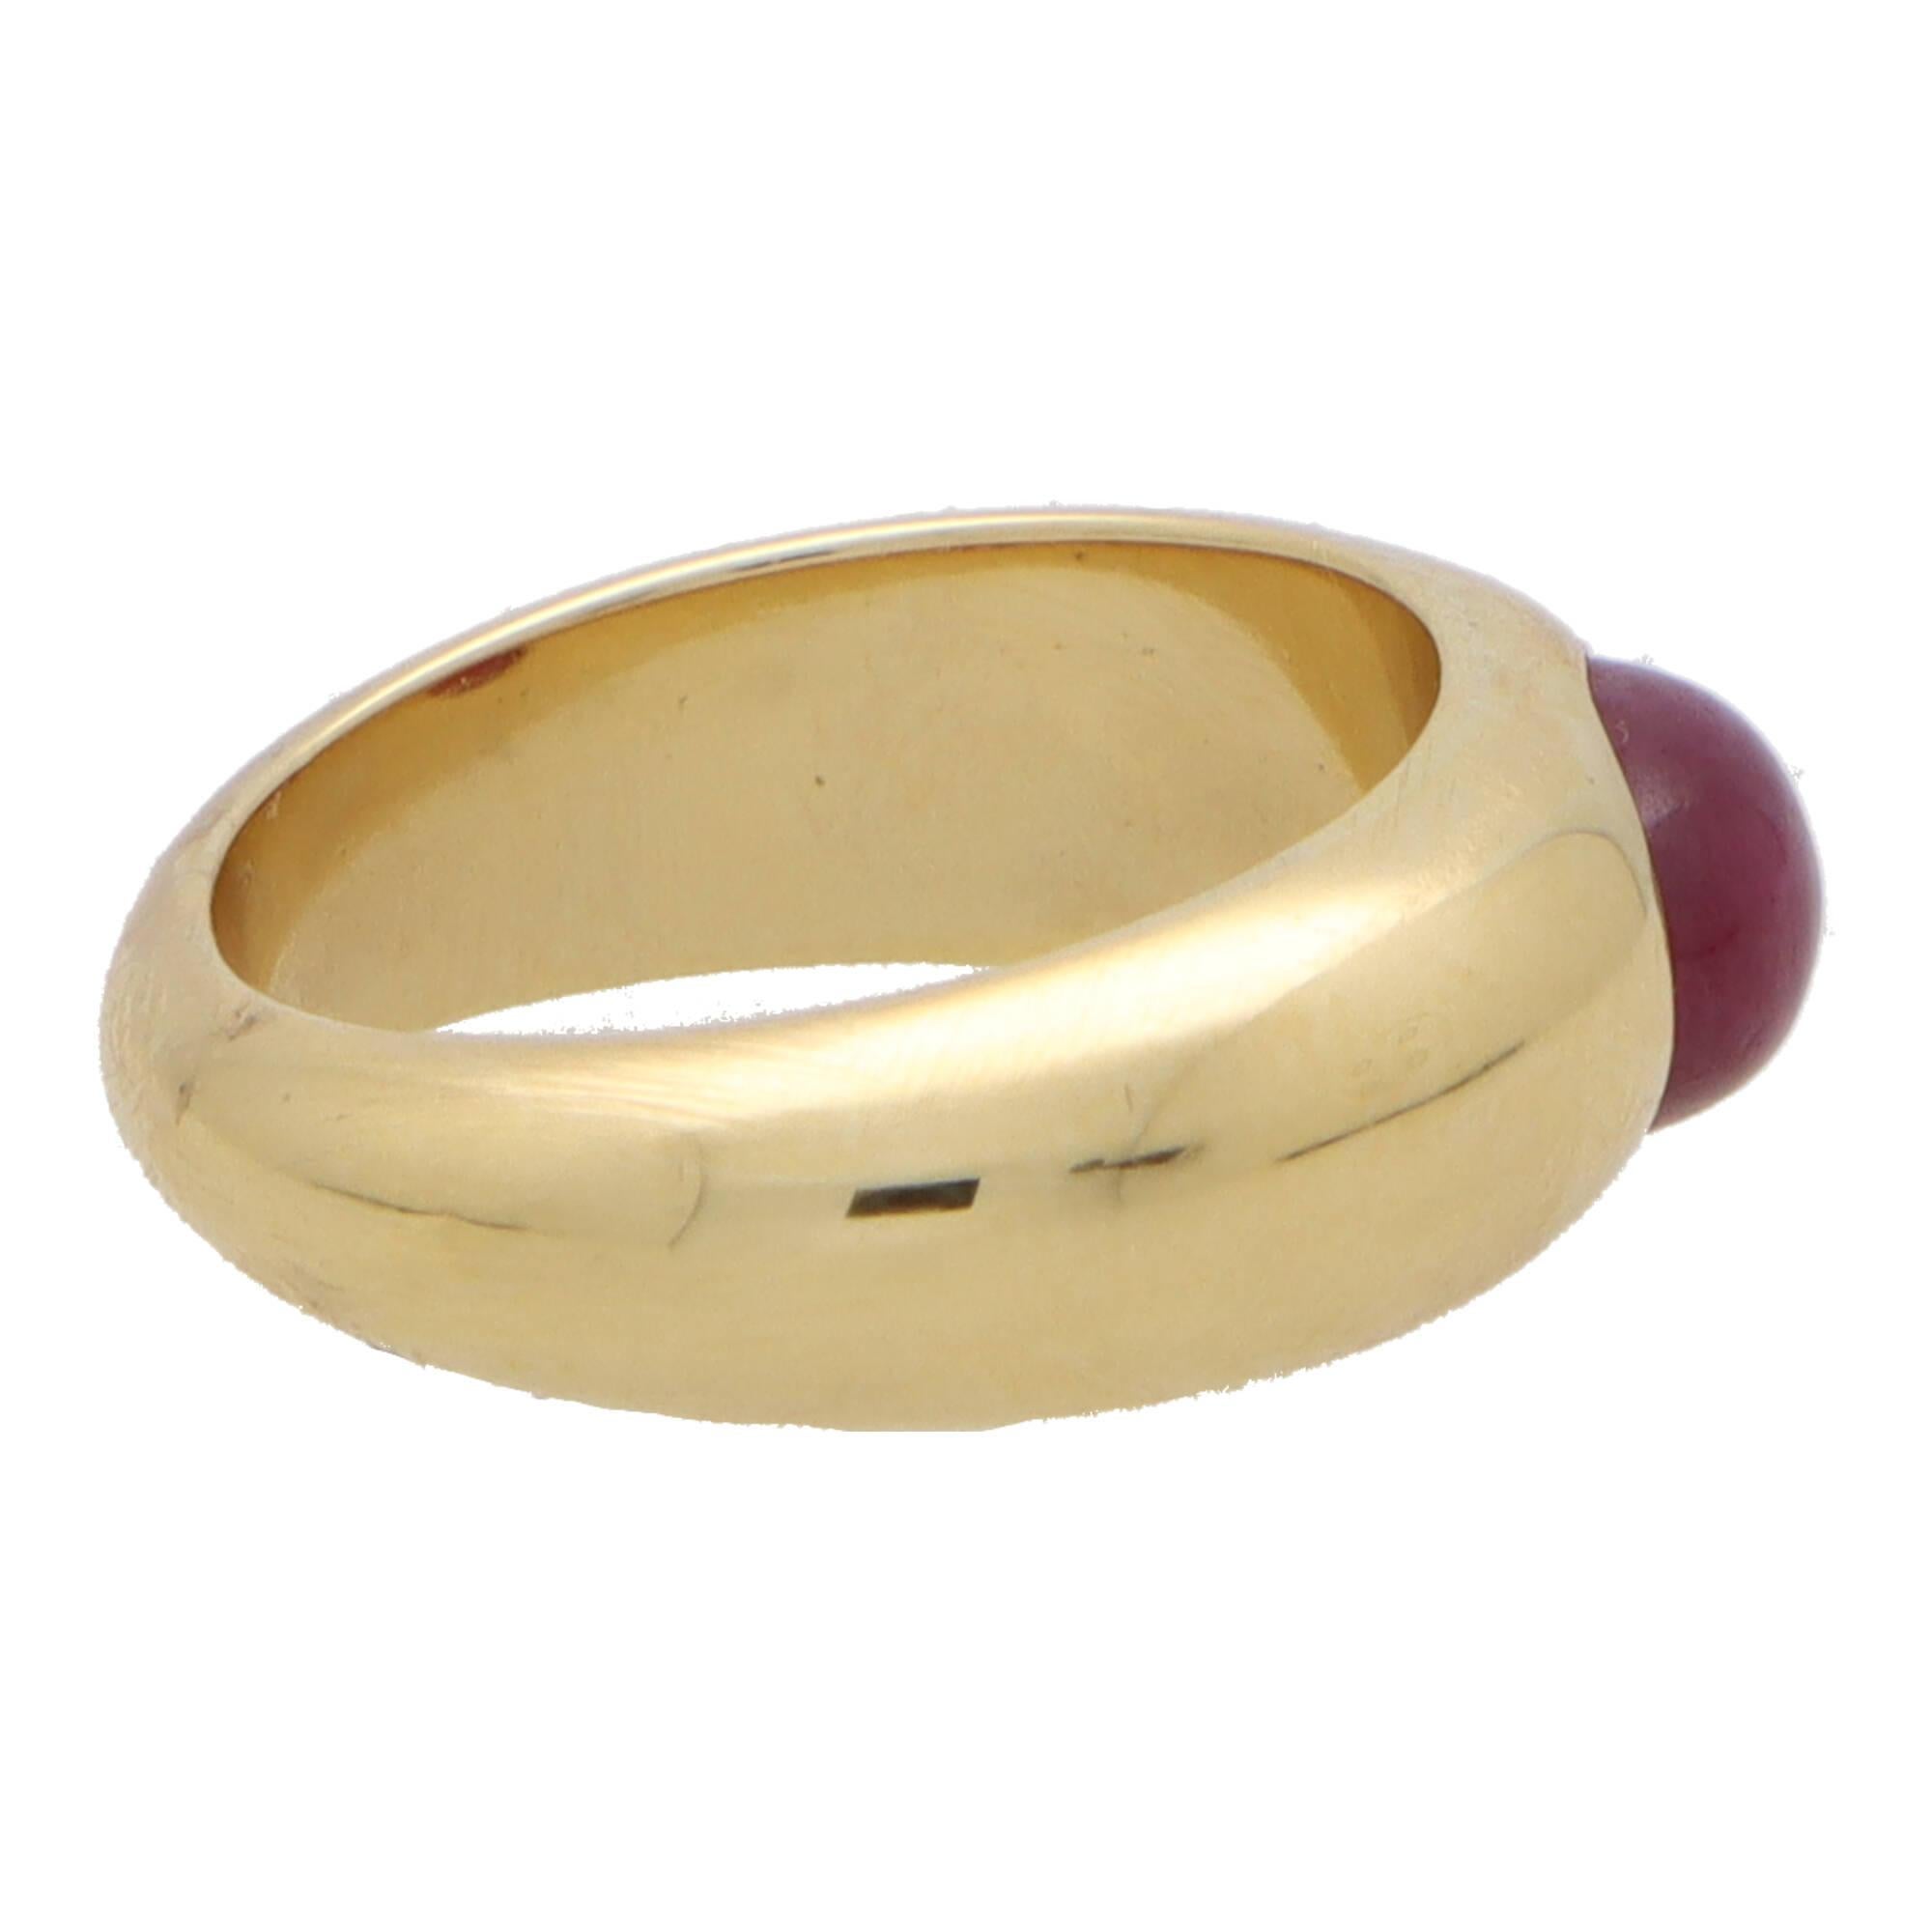 A stylish vintage cabochon ruby gypsy set chunky ring set in 18k yellow gold.

The ring is solely set with an oval cabochon vibrant red ruby stone that is bezel set securely in a chunky style band.

Due to the design and size, this ring could be